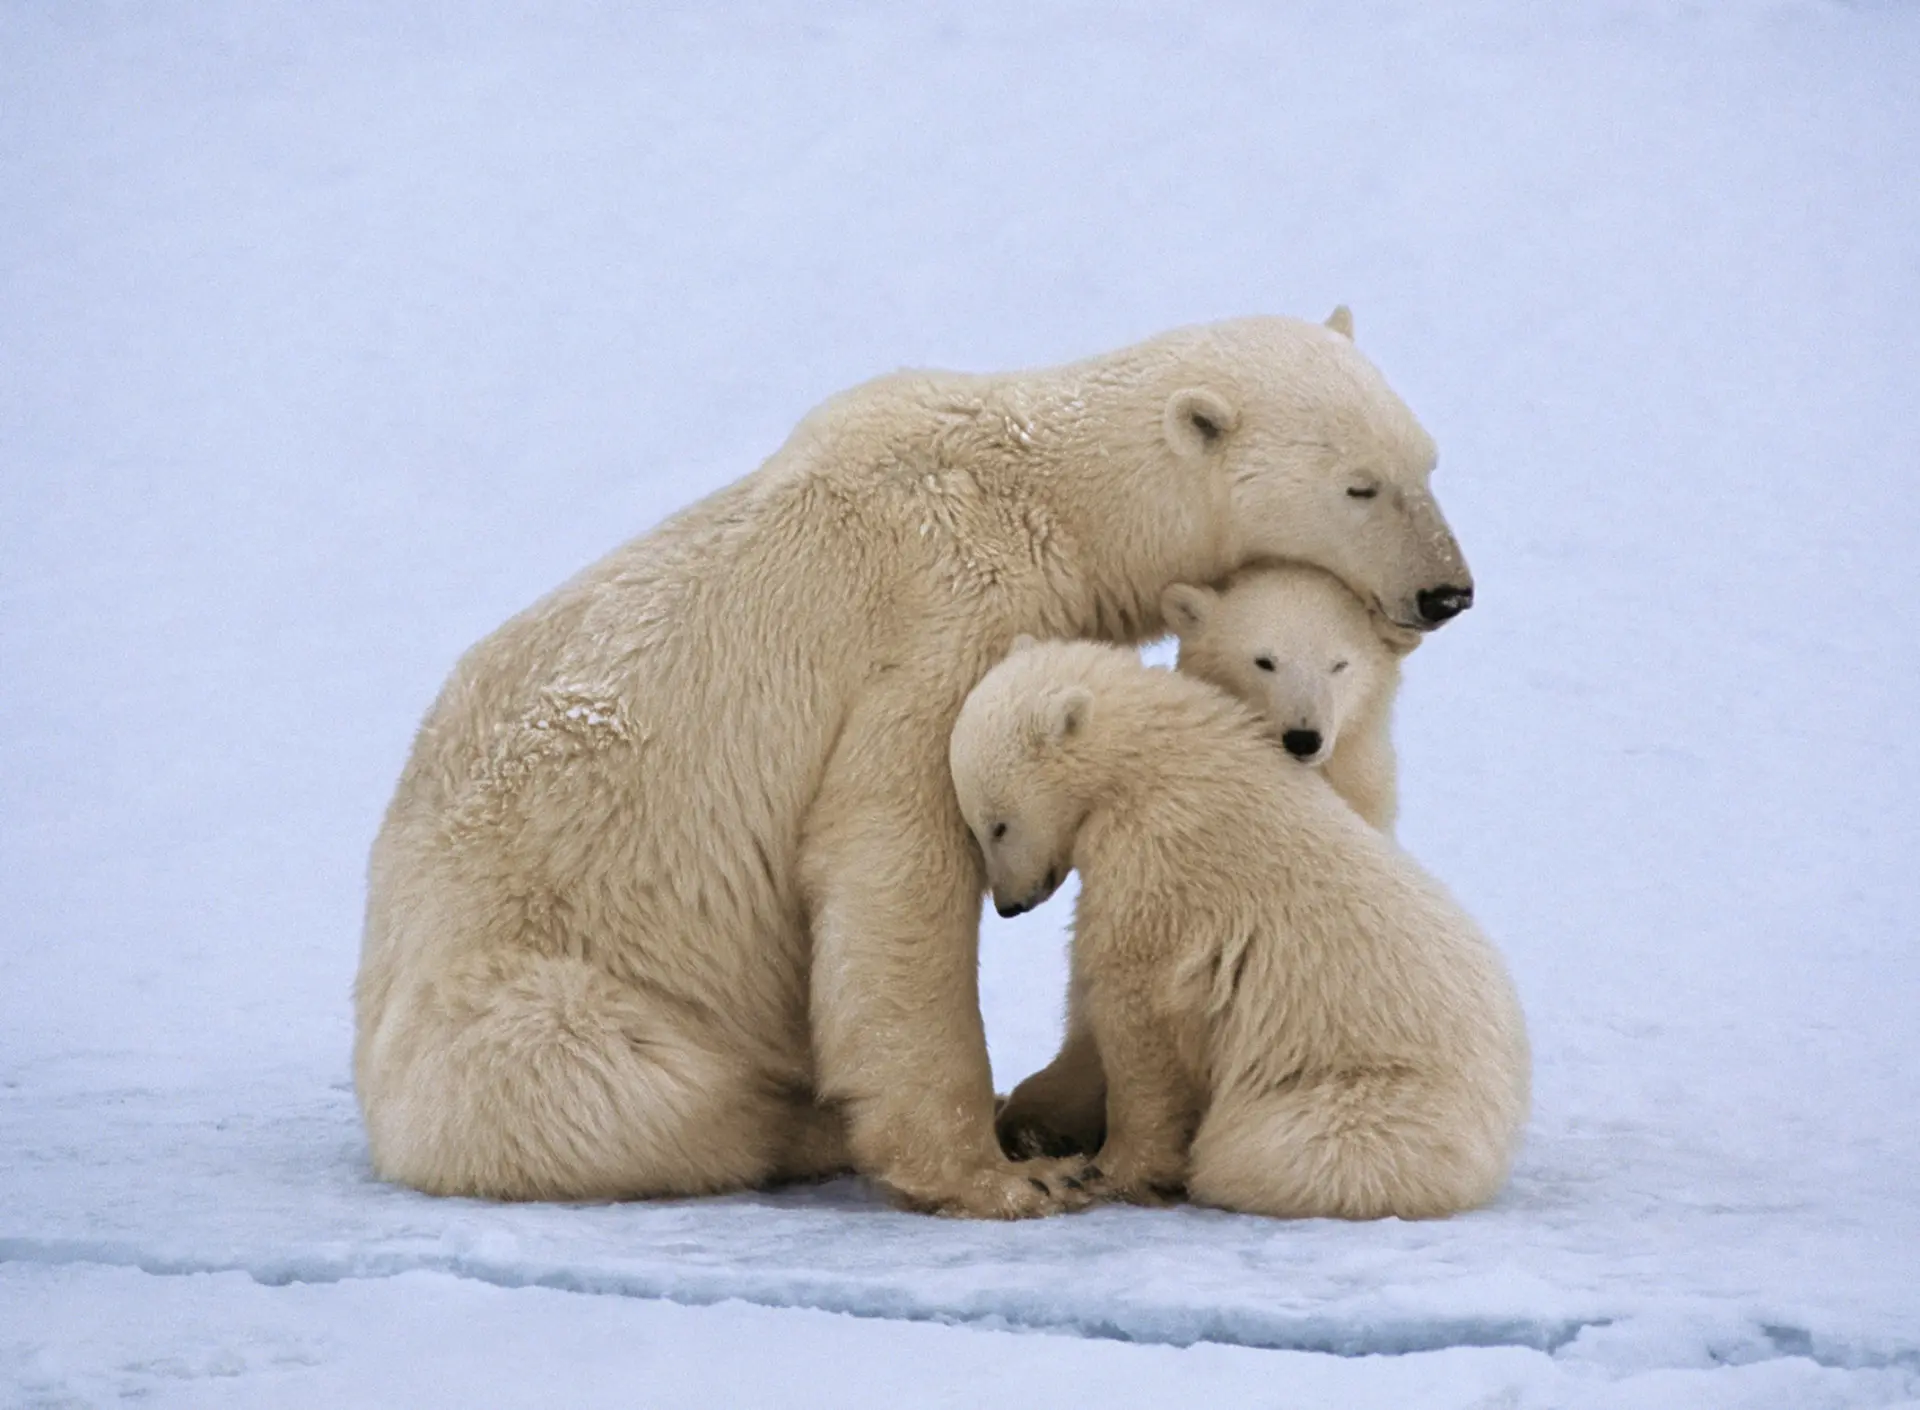 International Polar Bear Day draws attention to the changing climate